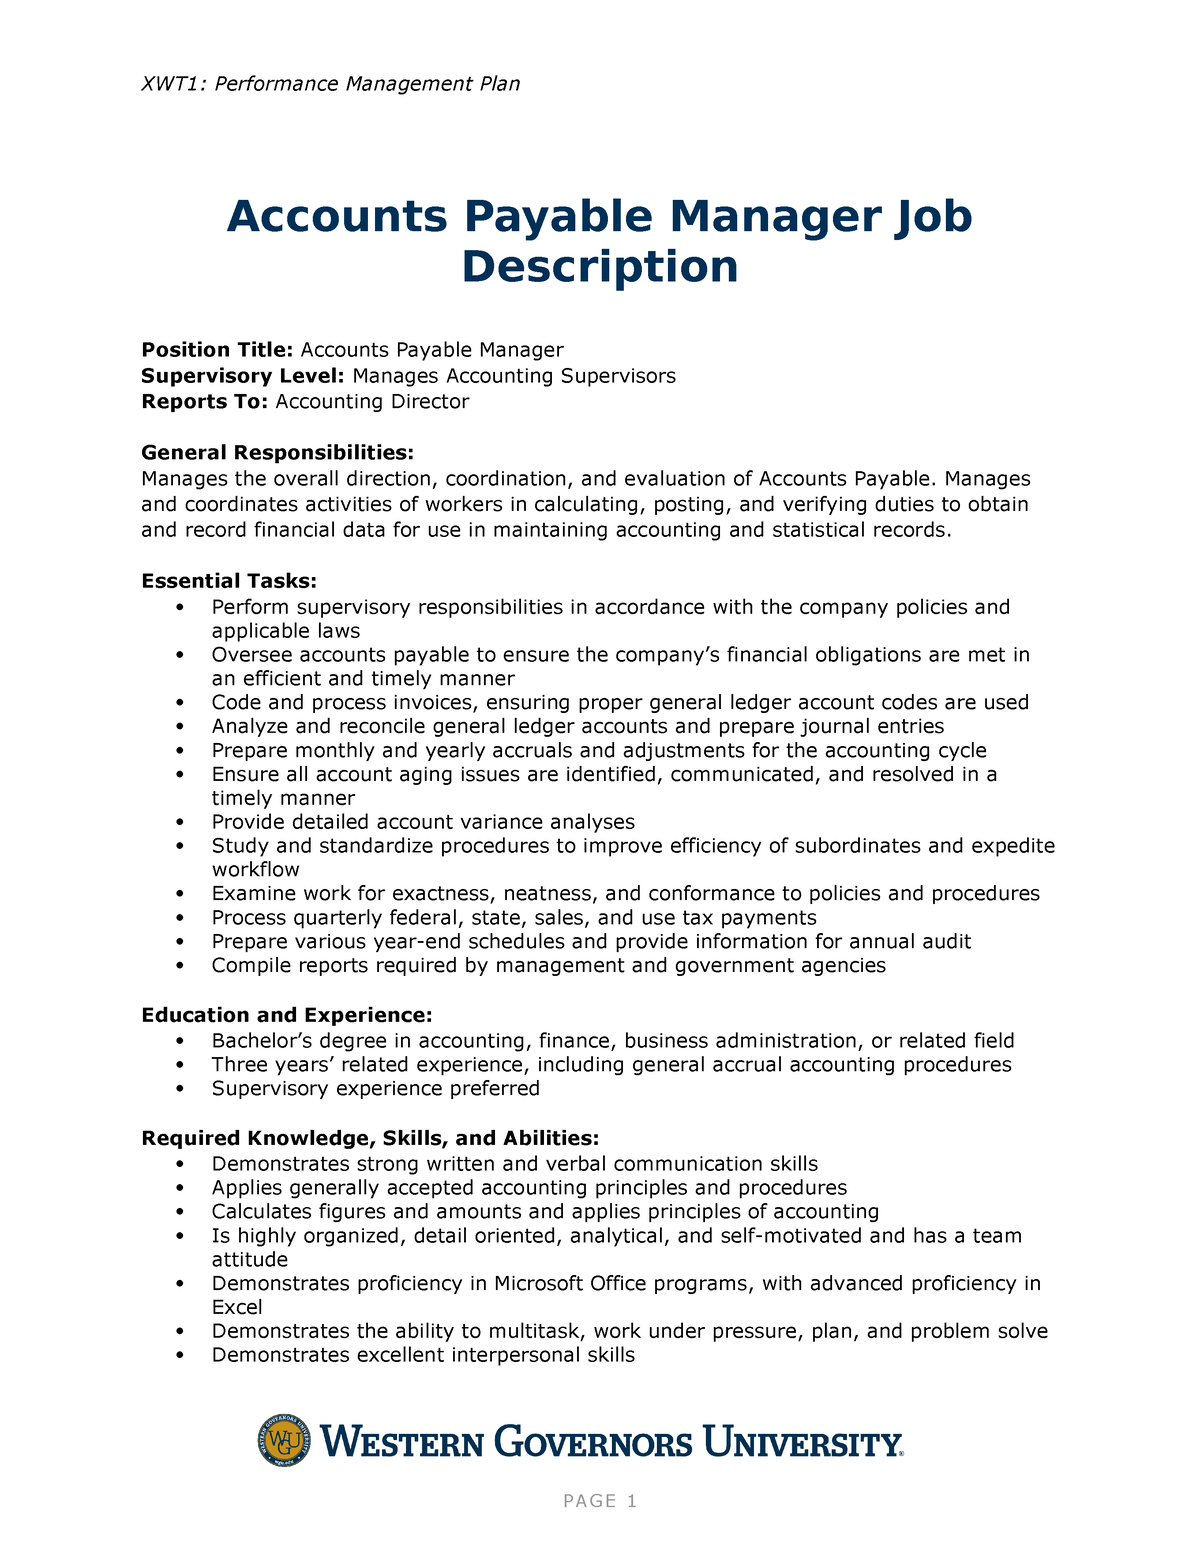 assignment of accounts payable